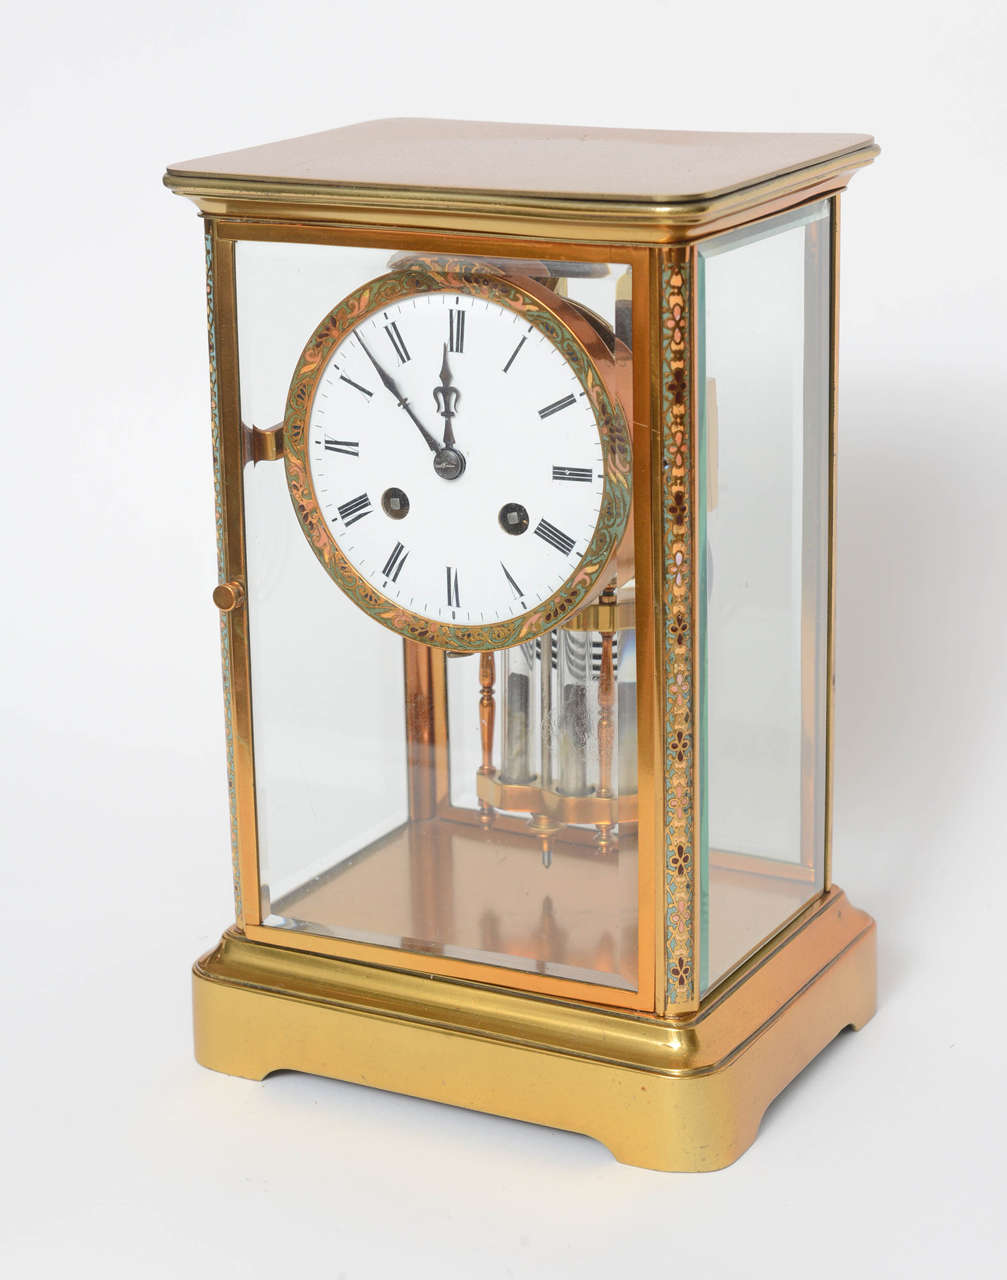 Regulator mantle clock, executed in gilt bronze and glass, having a regulator top with champlevé running frieze on either side of the beveled glass case & the white enamel dial with Arabic numerals, the whole rising on a plinth base, retains the